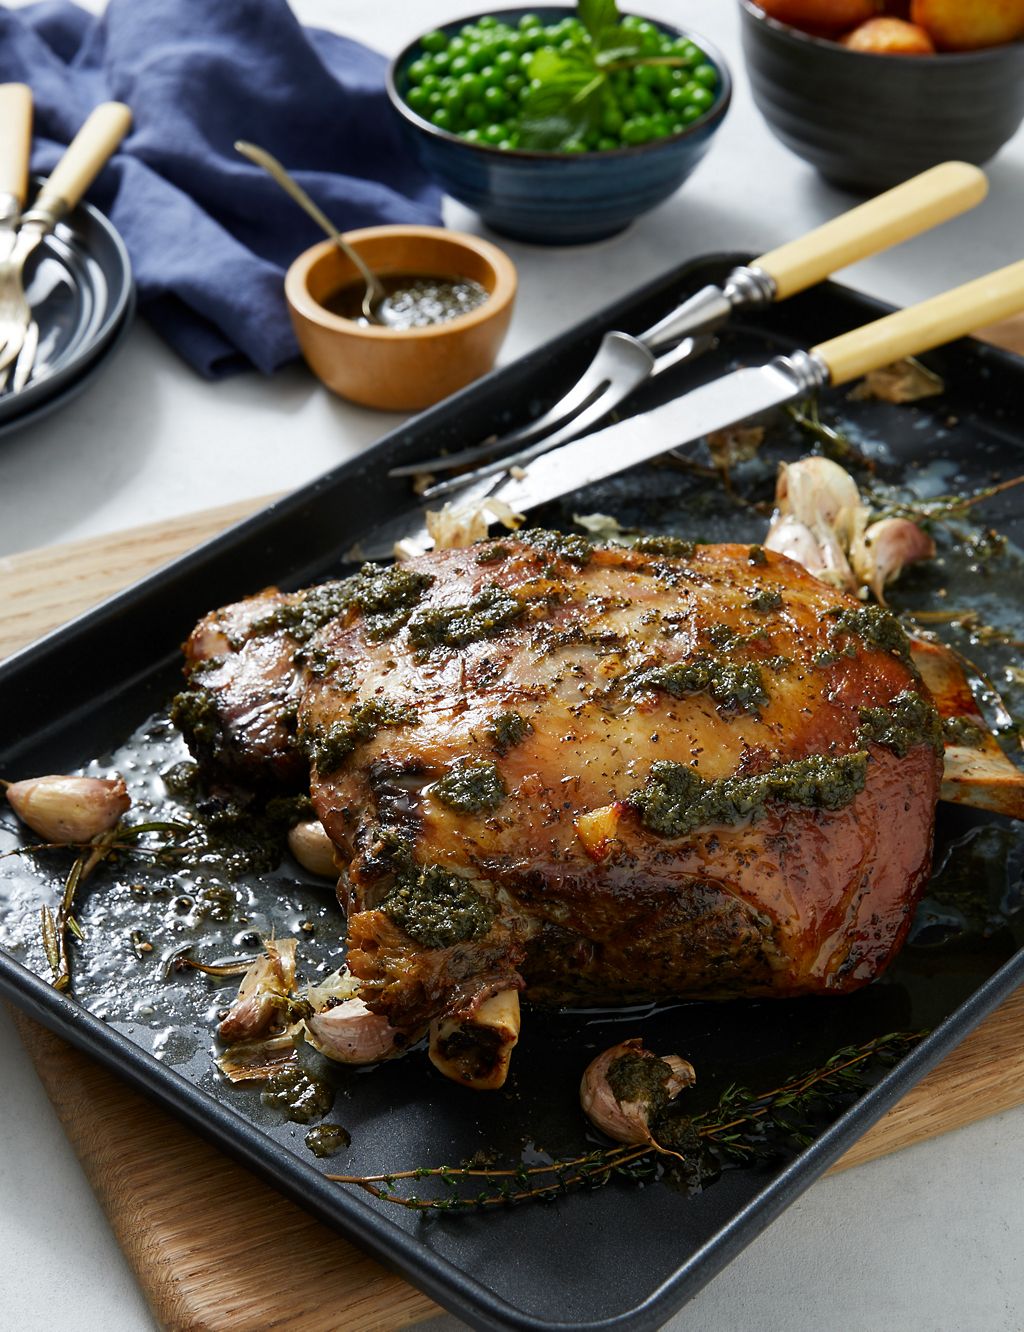 Slow Cooked Lamb Shoulder with Mint Drizzle (Serves 6) - (Last Collection Date 30th September 2020) 3 of 3